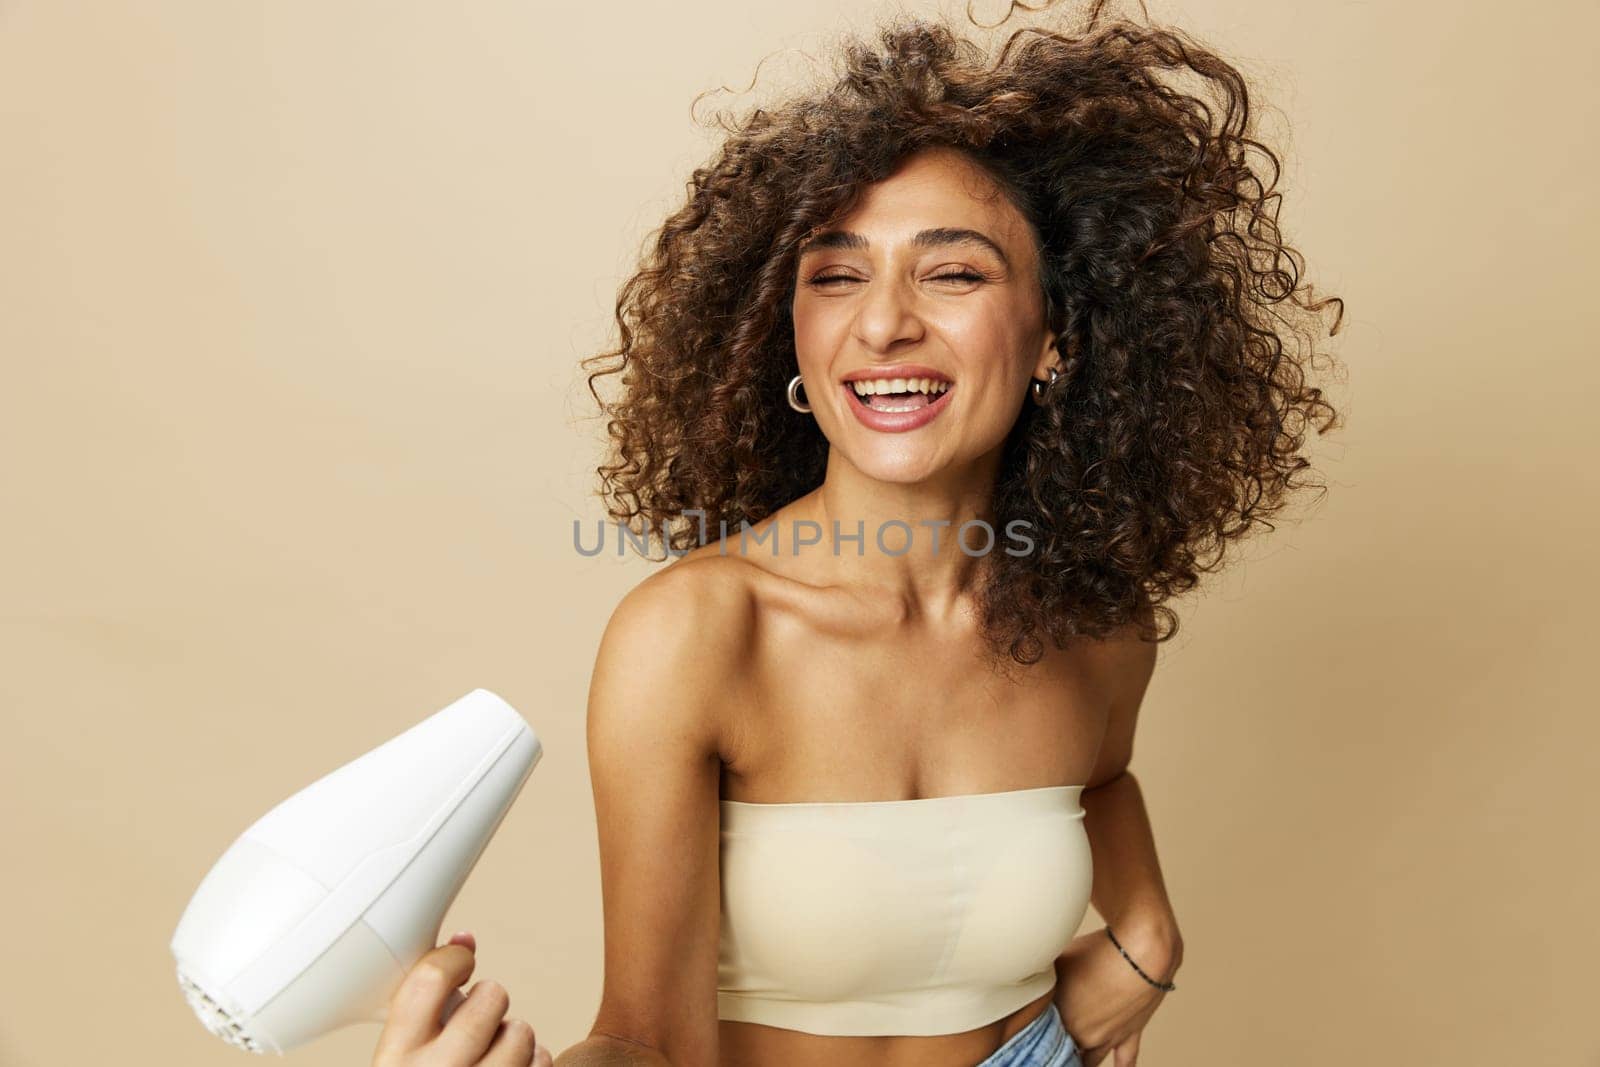 Woman dries curly hair with blow dryer, home beats styling products, smile on beige background. High quality photo